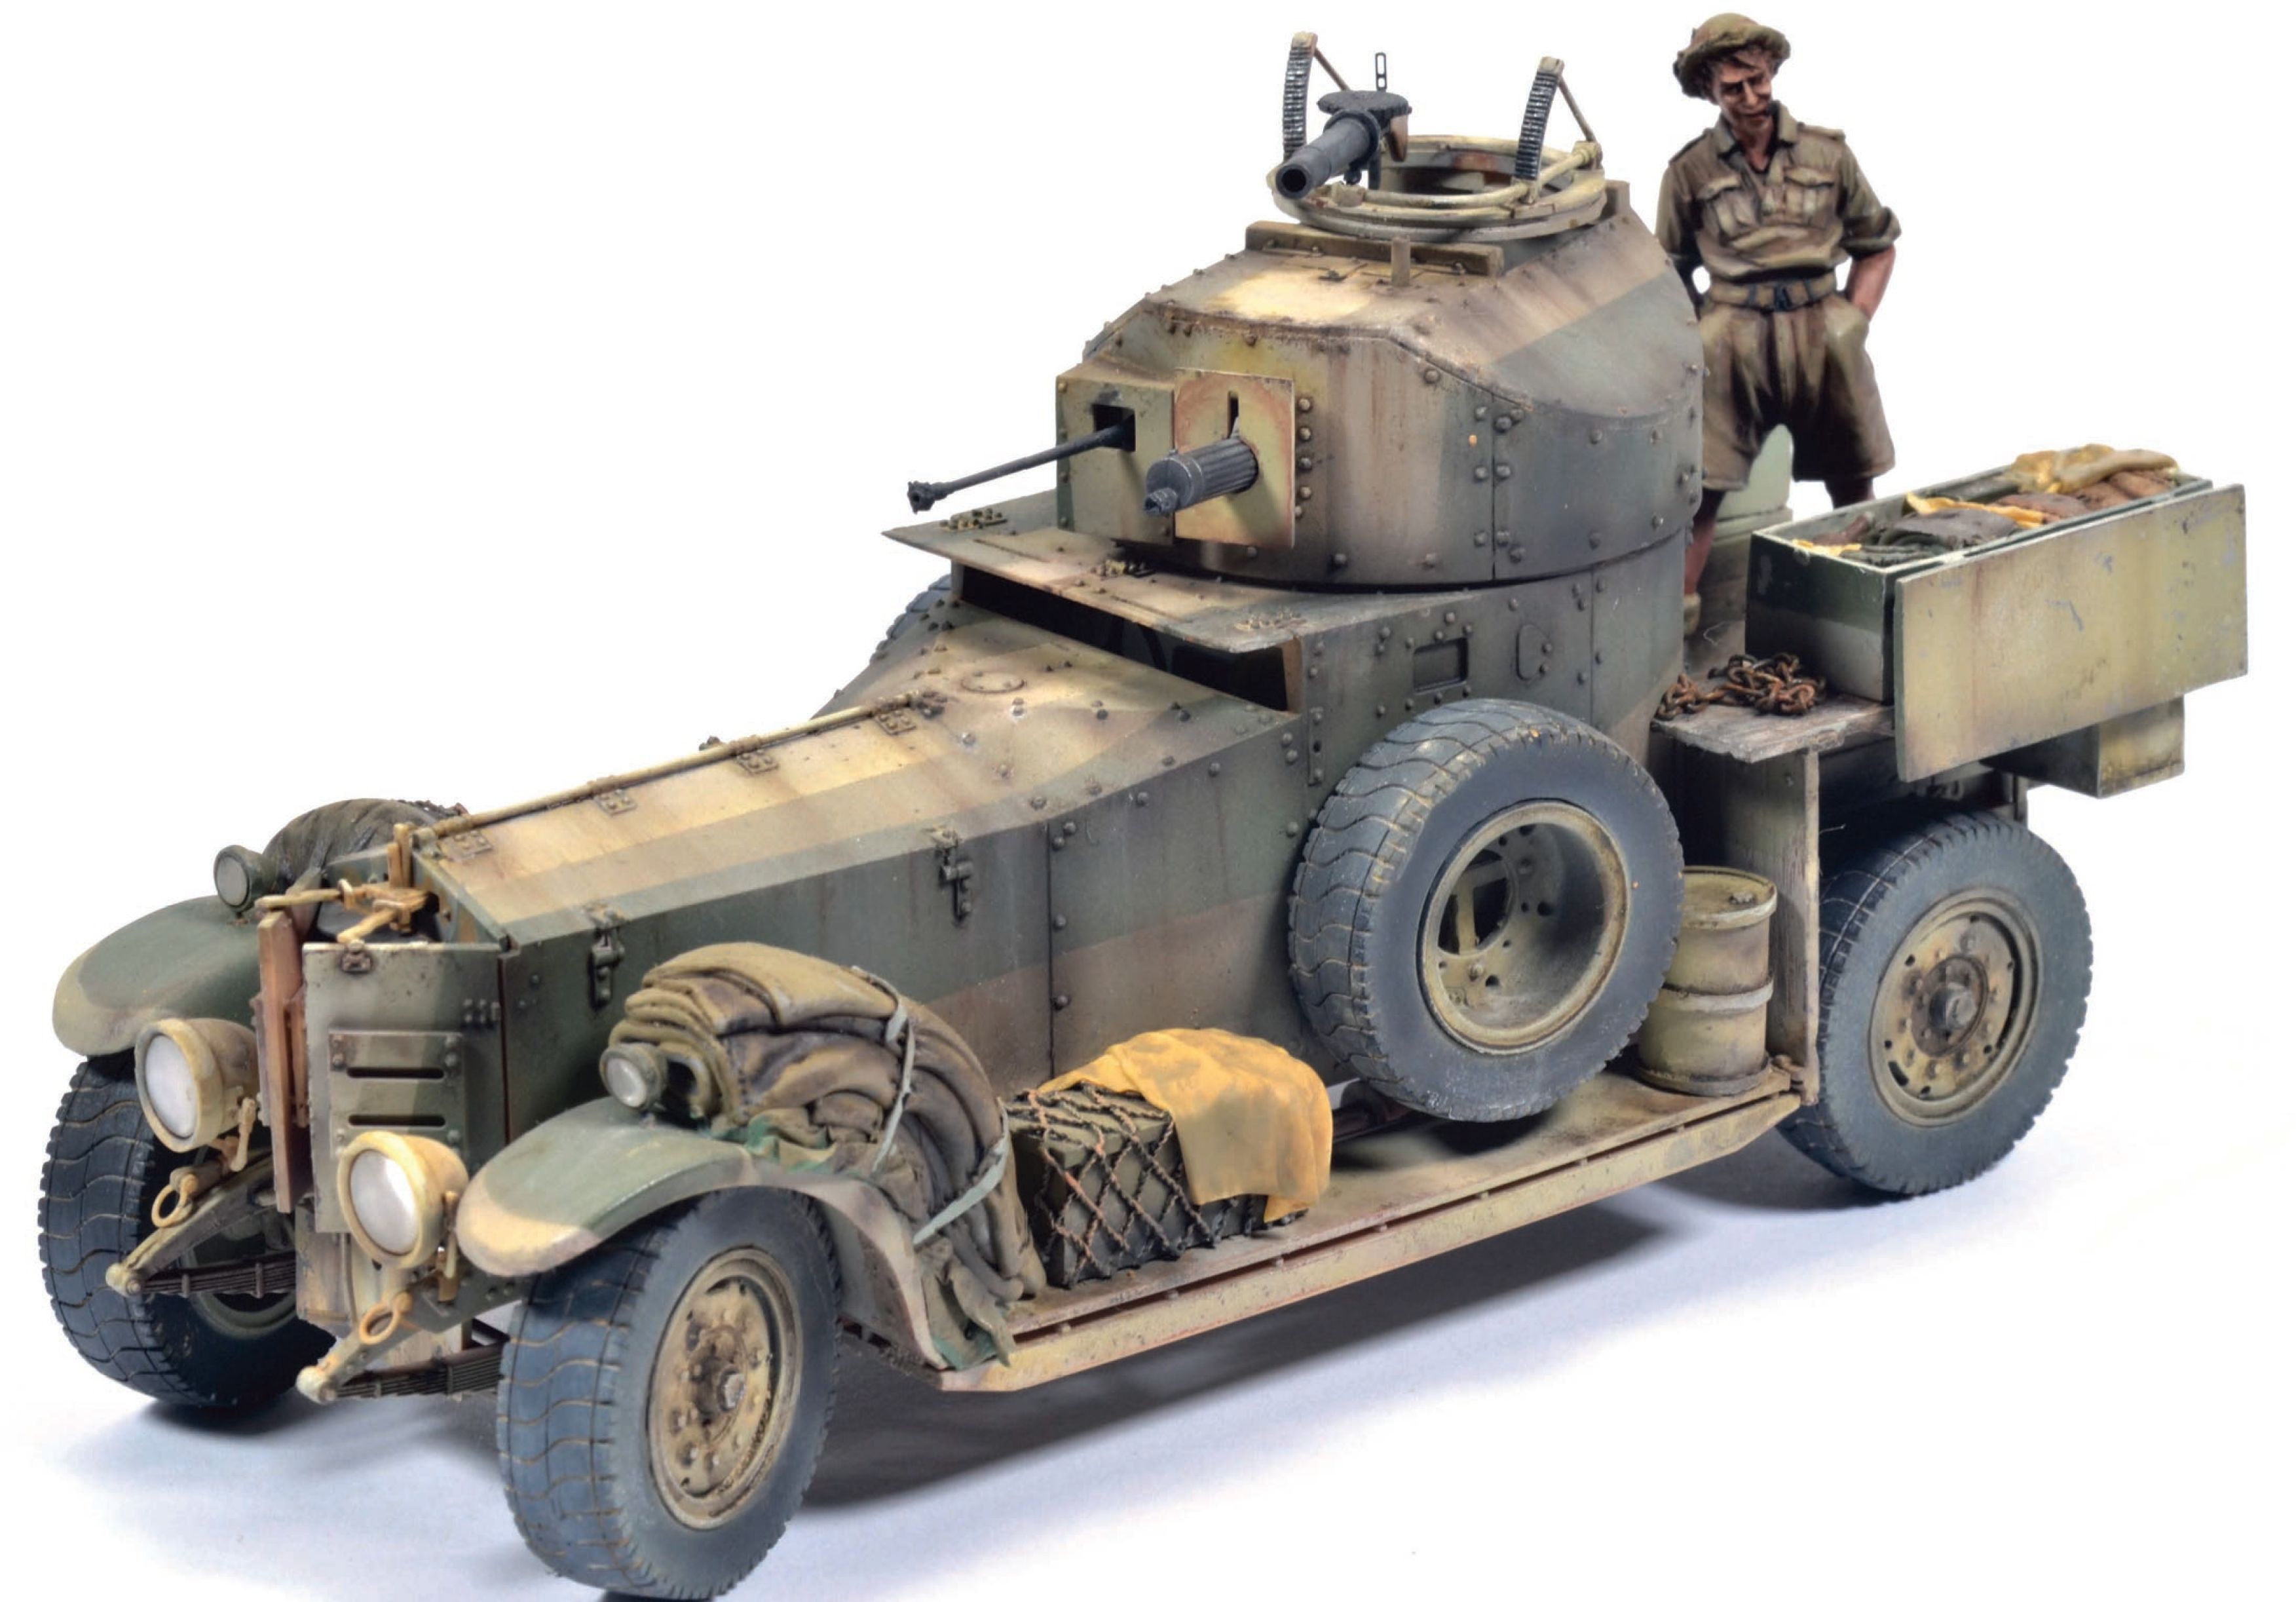 Rolls Royce Armored Car 135 Meng kit Caunter scheme gallery in  comments  rmodelmakers